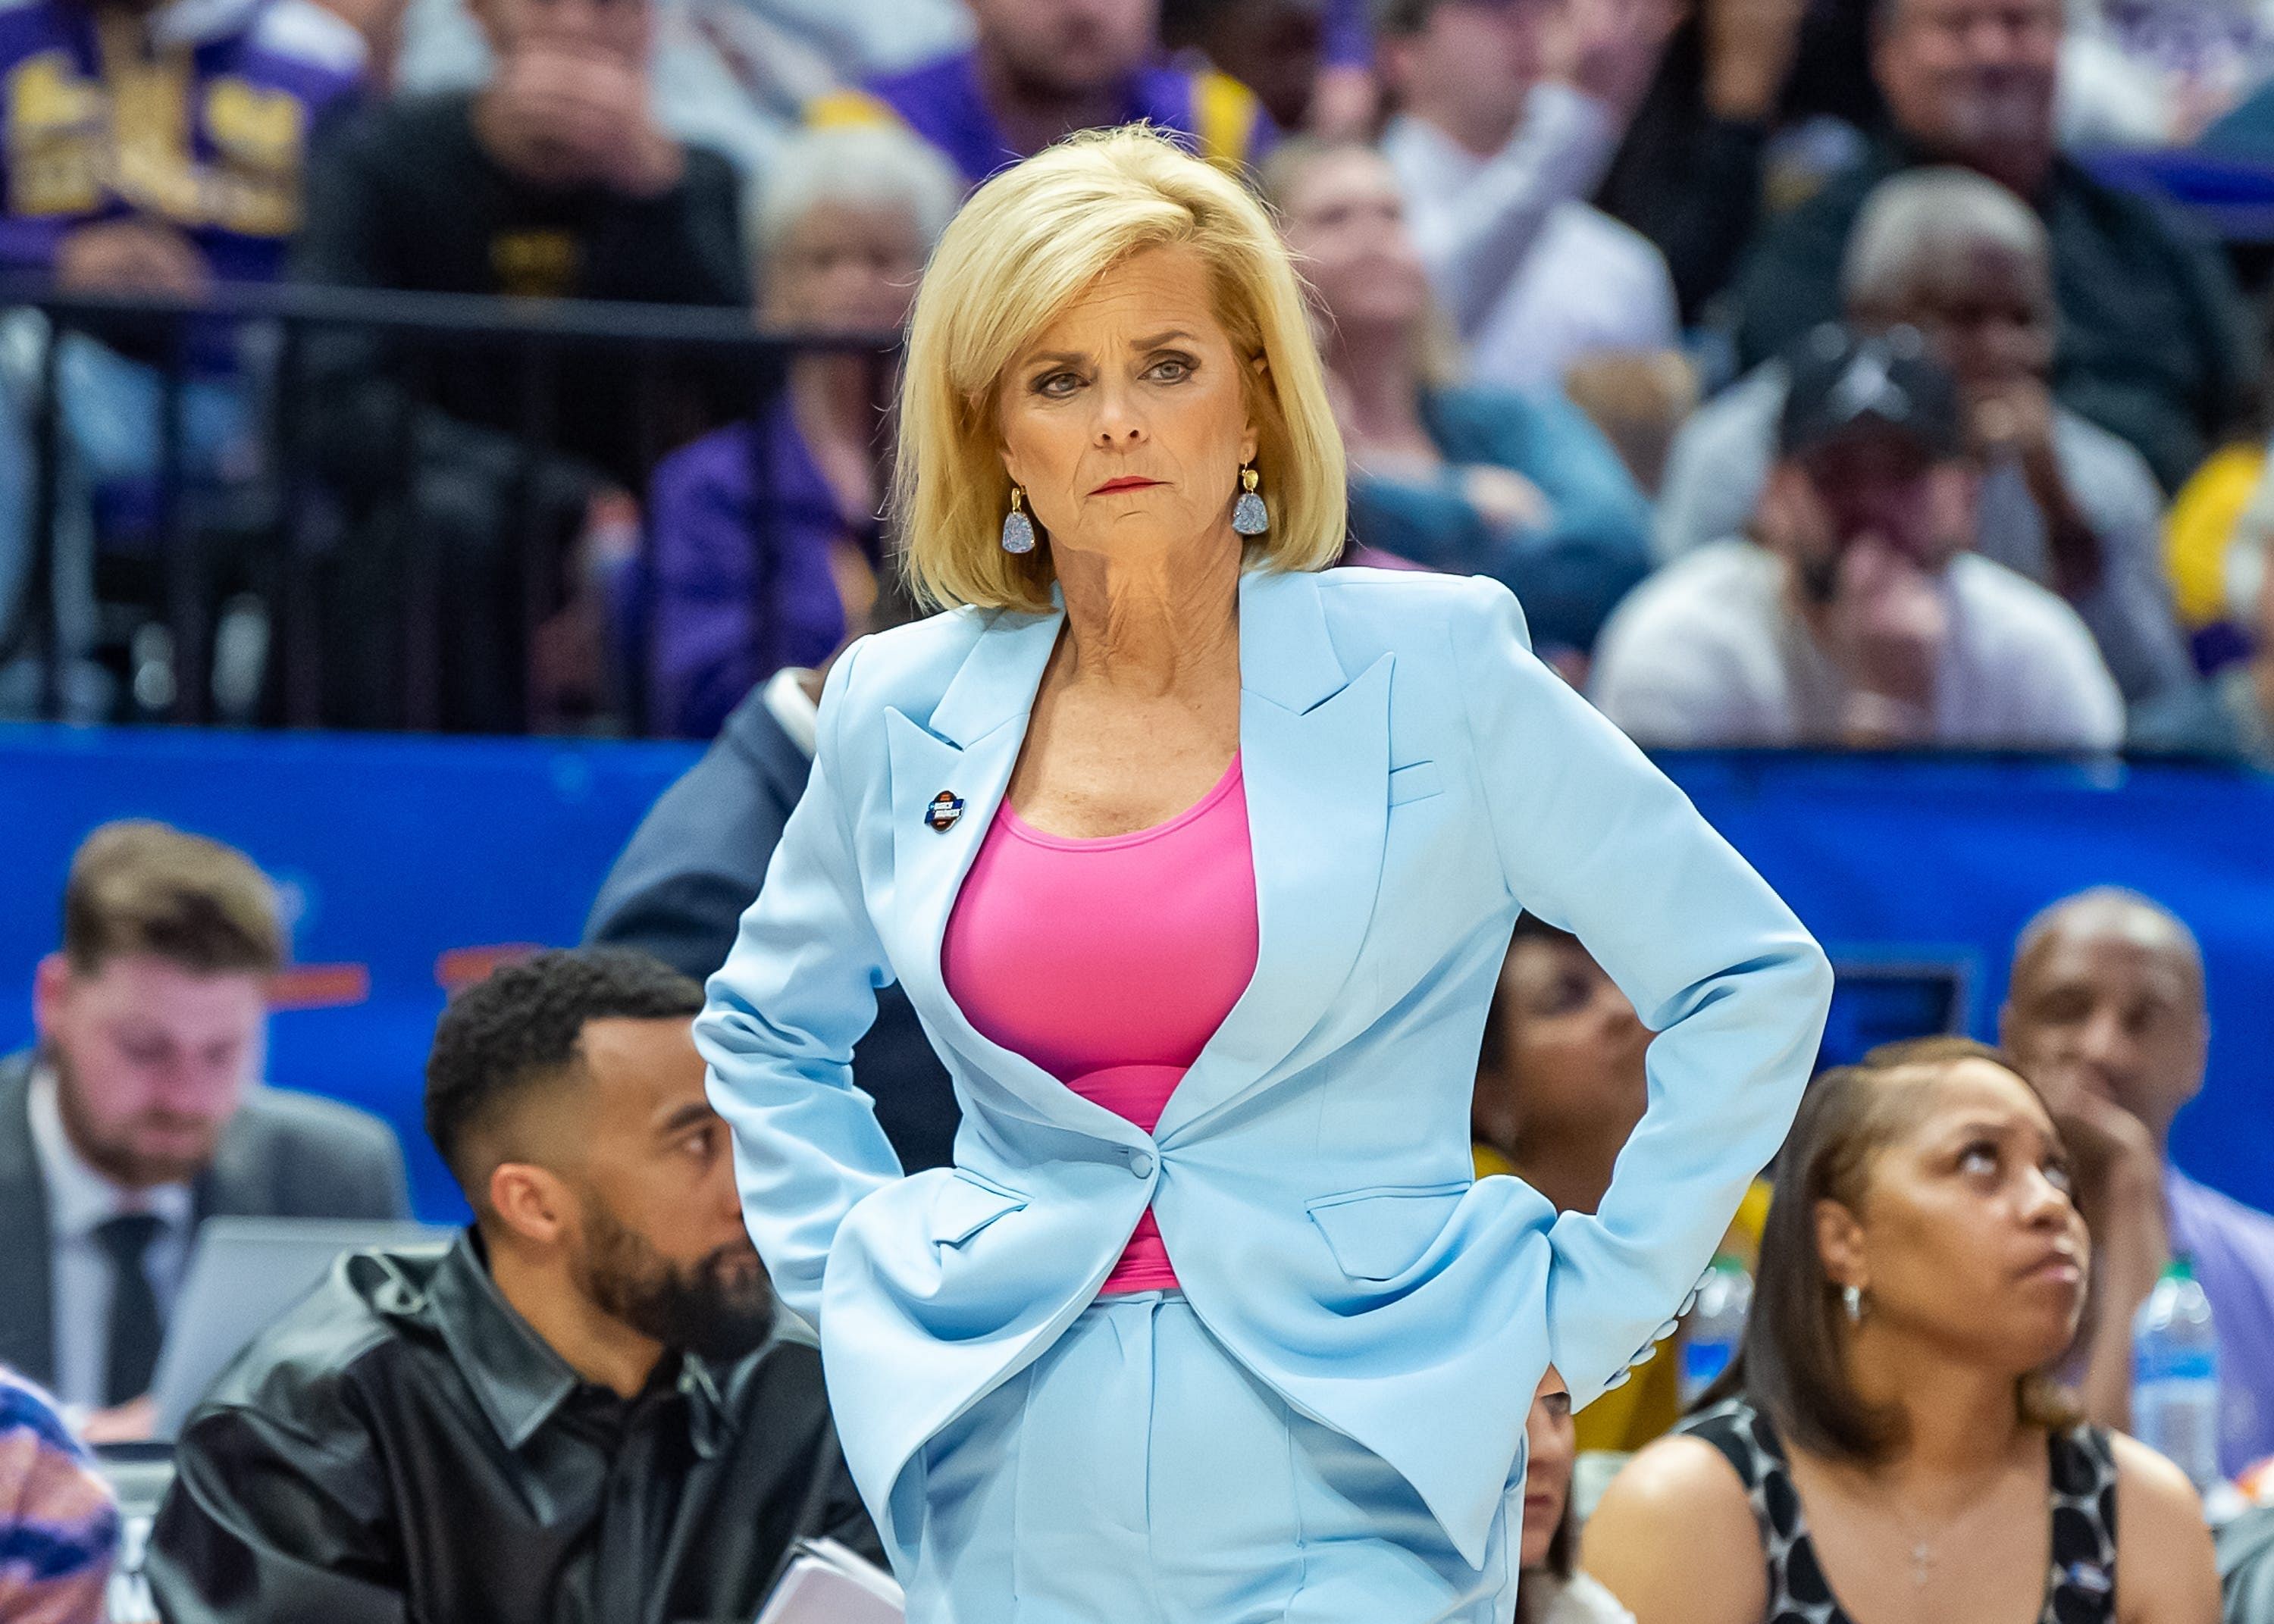 Kim Mulkey, who was coaching Baylor, won their Final Four battle, 59-47, in 2012.